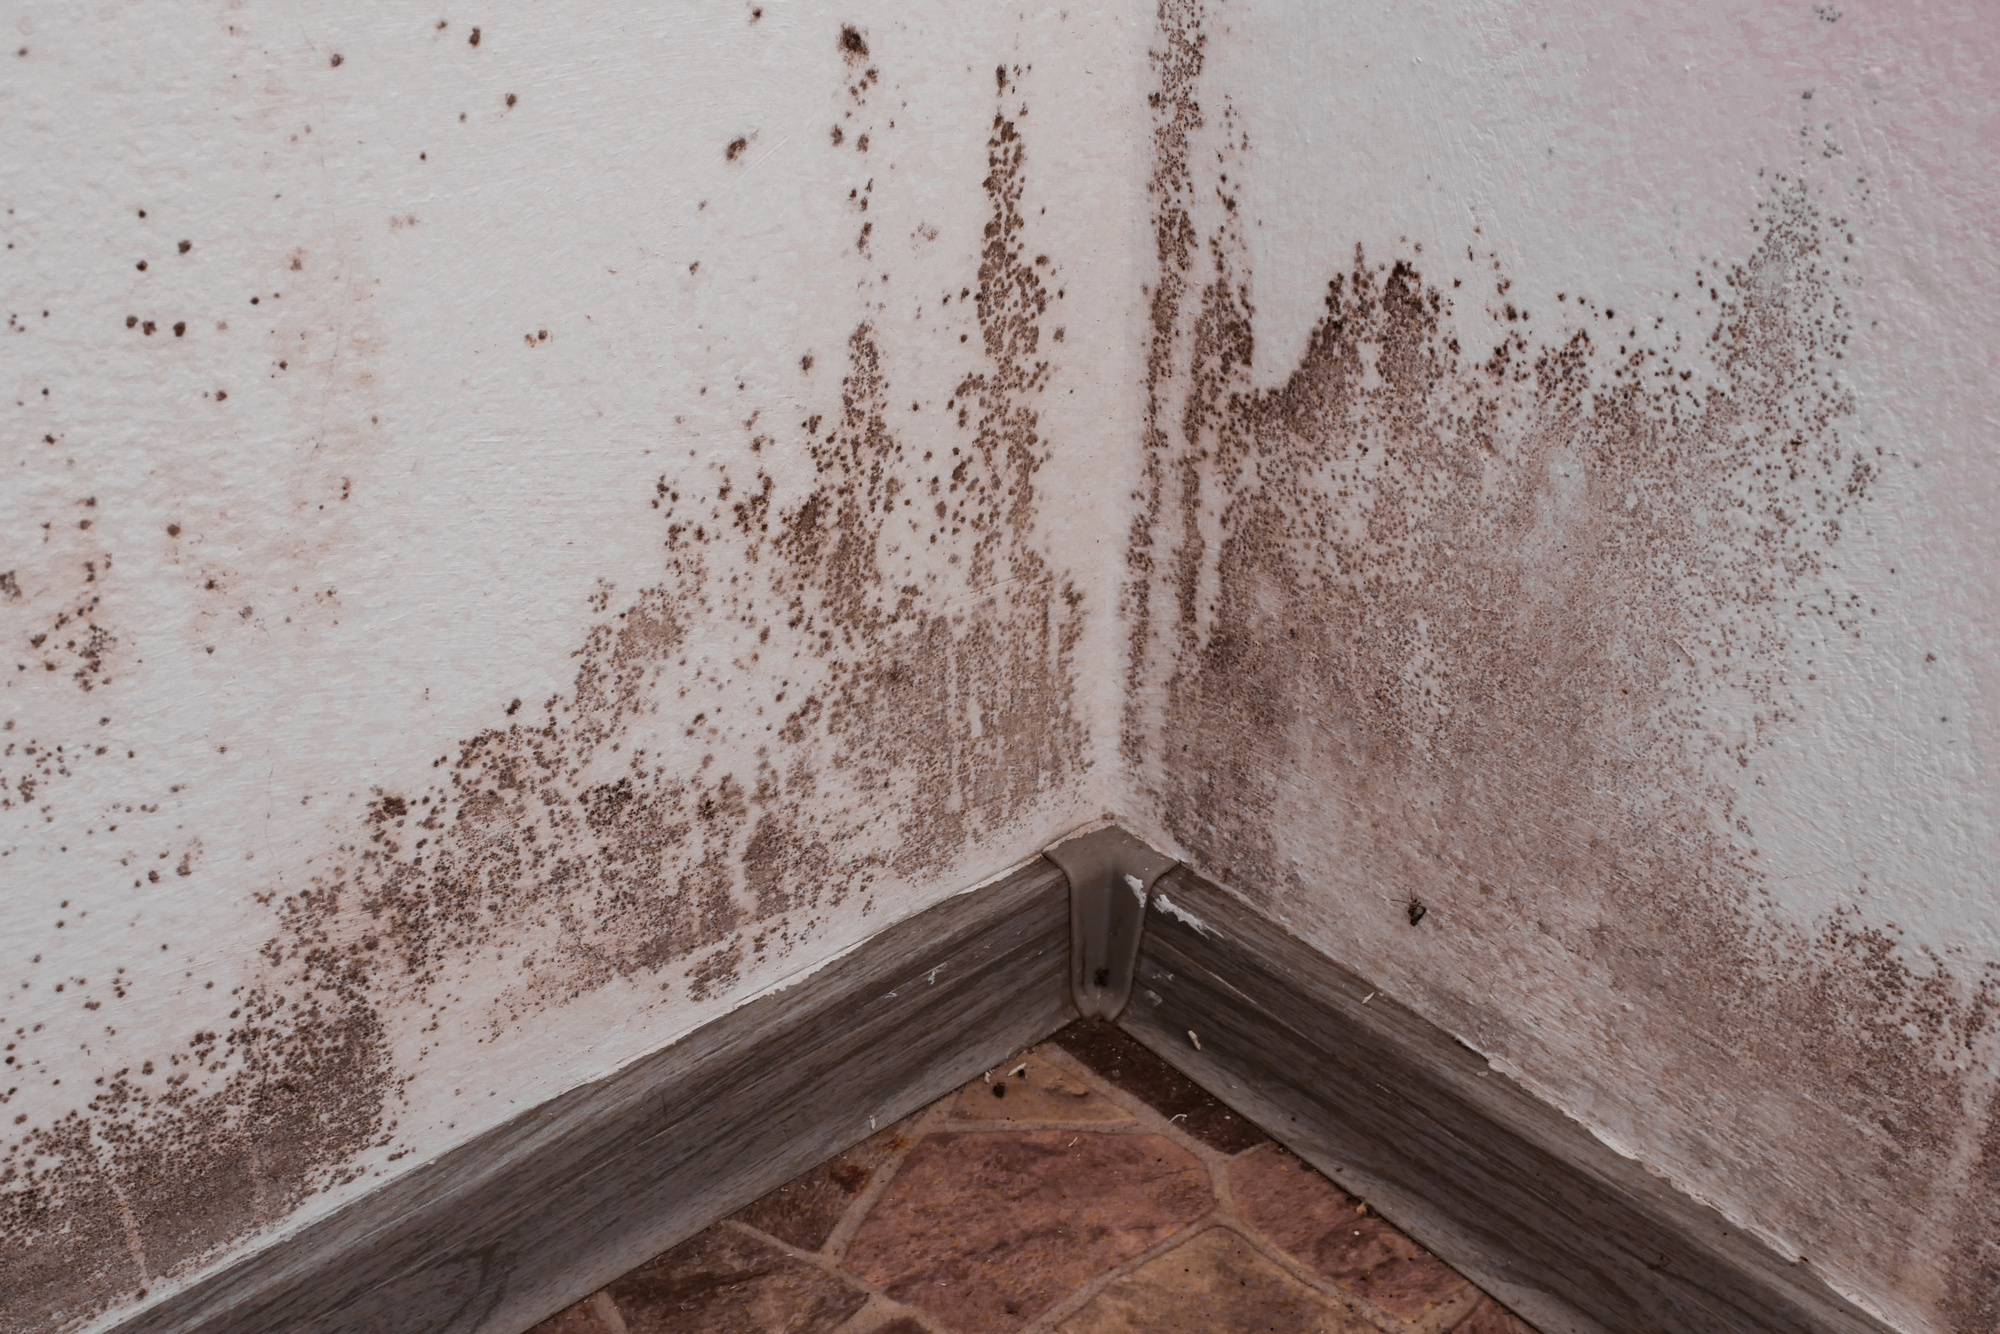 Mold removal near me: Do you want to know how to choose the right mold removal service? Read on to learn how to make the right choice.